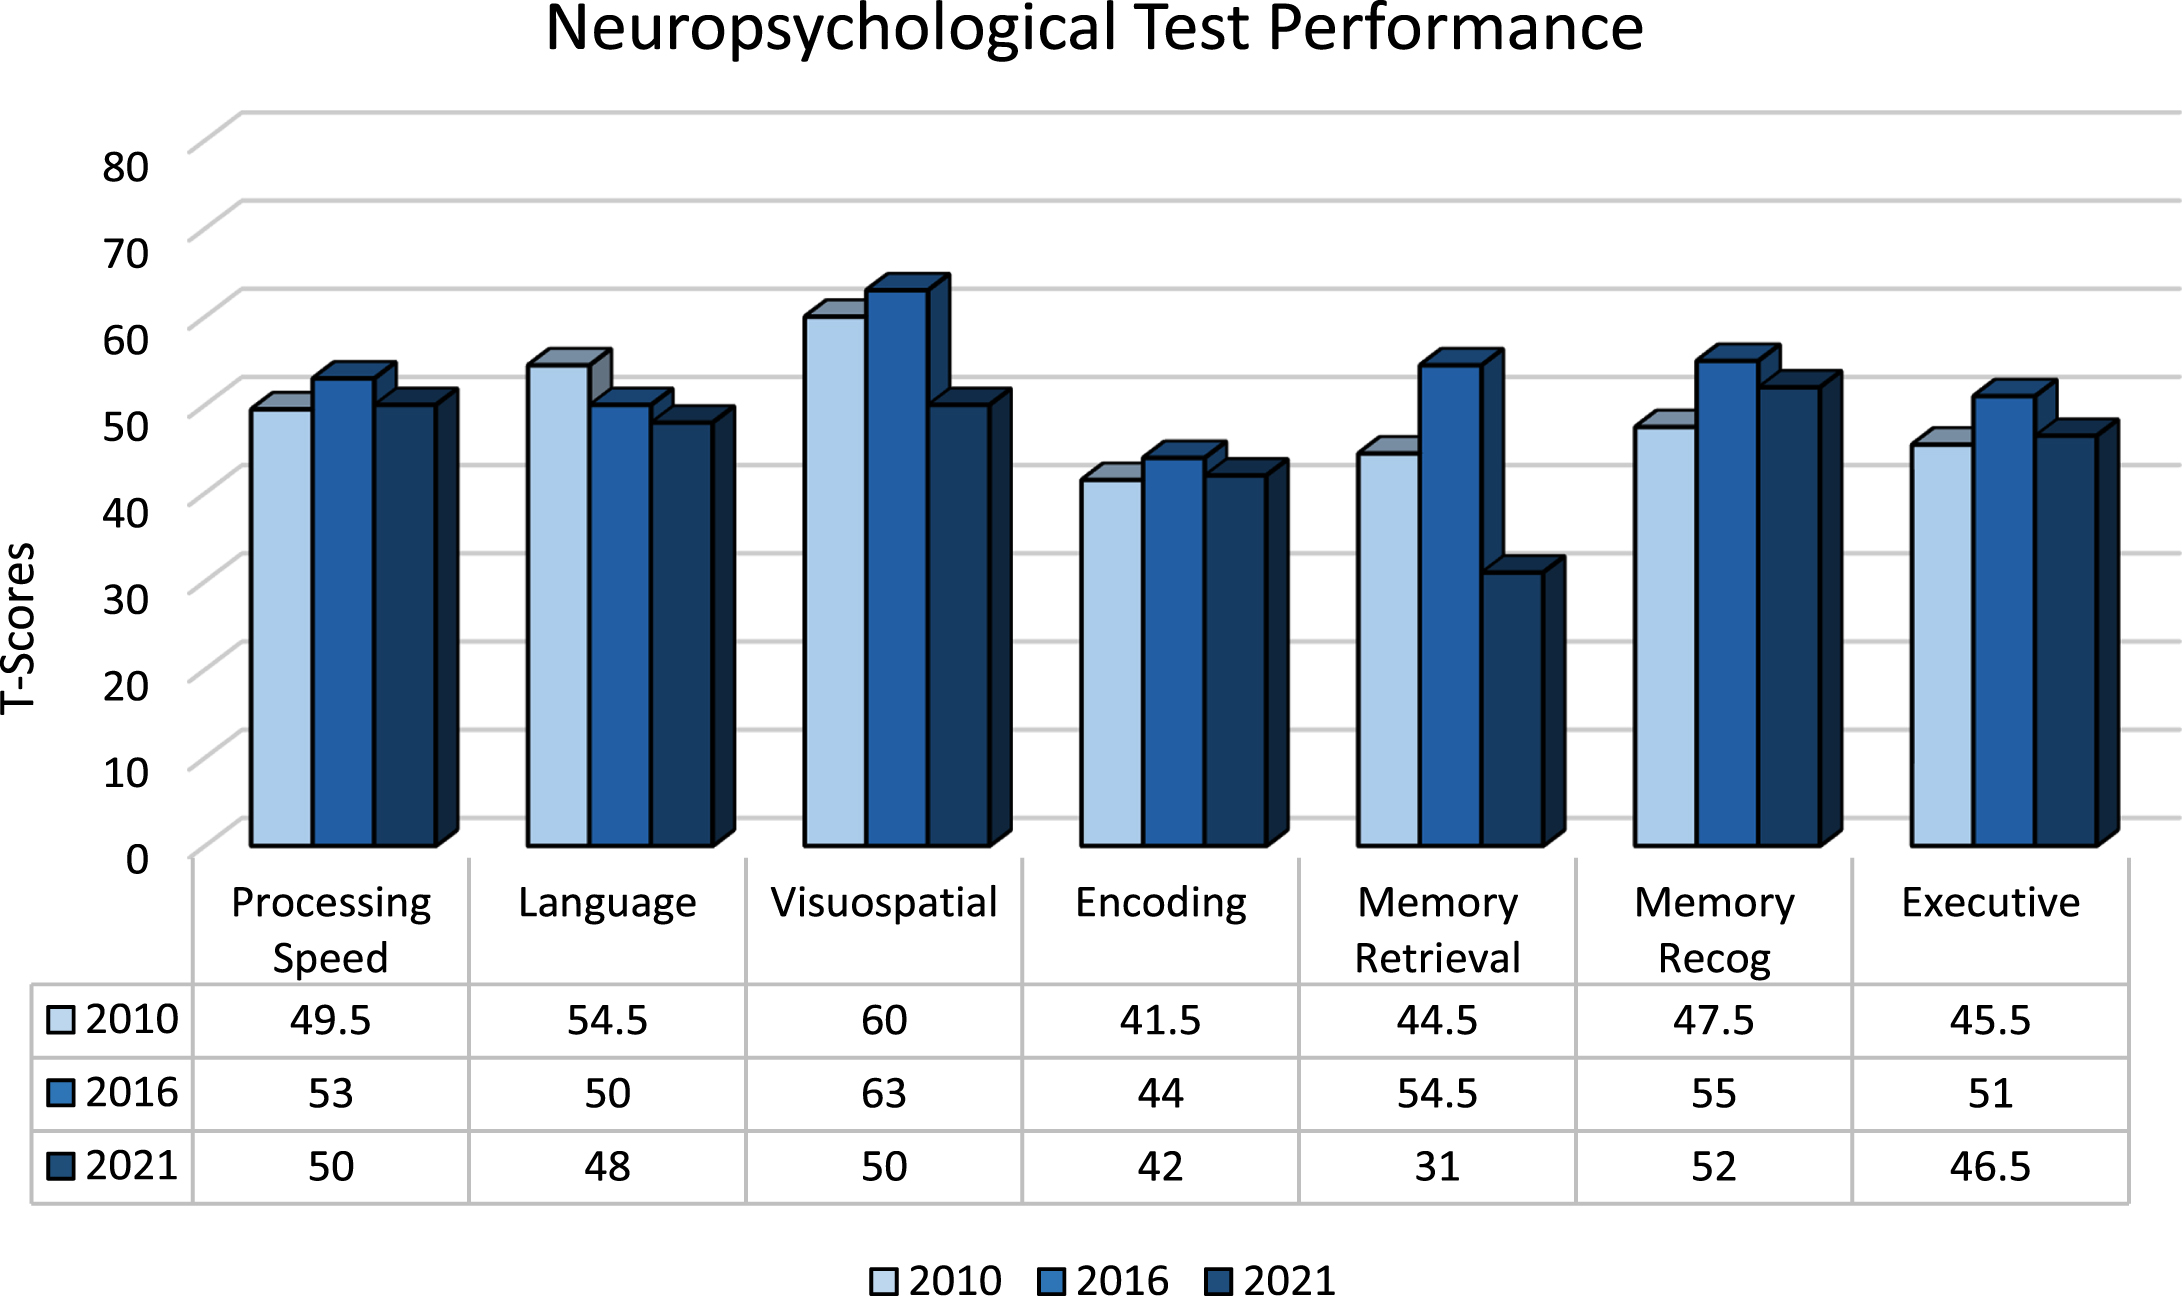 Neuropsychological Test Performance by Cognitive Domain 2010–2021. *T-scores are standardized values calculated using normative data (i.e., mean, standard deviation) from test performance of healthy peers of similar age and/or education. Values <29 Impaired; 30–36 Borderline Impaired; 37–42 Low Average; 43–56 Average;>56 High Average or better. Scores shown here for each cognitive domain were obtained by averaging T-scores across individual tests. No clinically significant “outlier” values were identified during this process. Memory Recognition scores are not normally distributed.